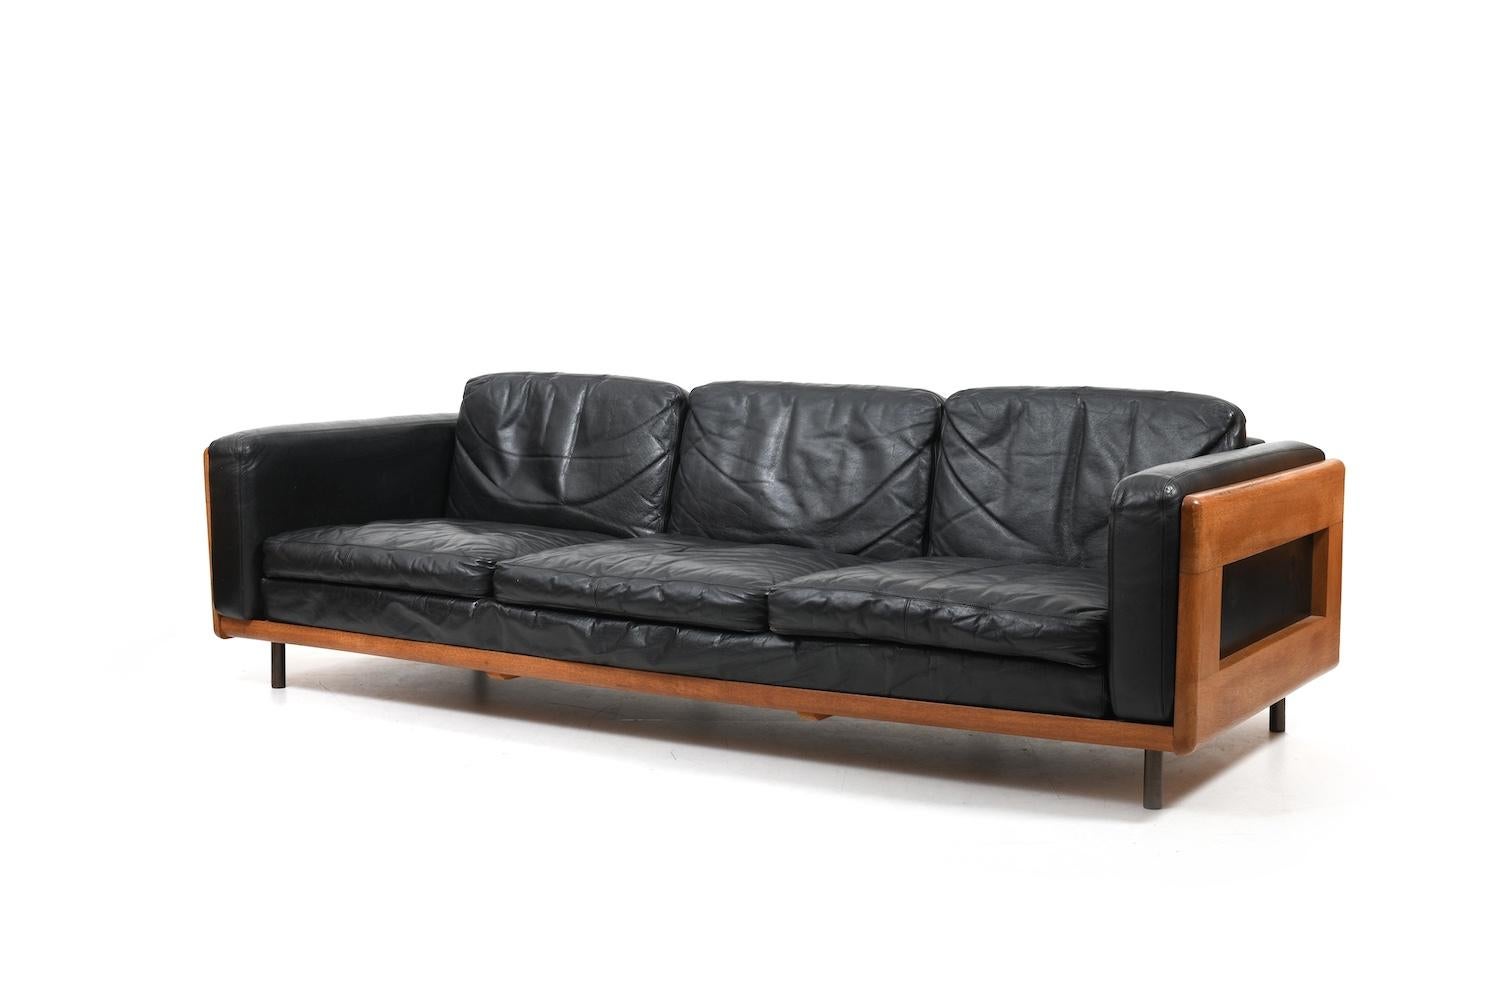 1960s produced danish three seater sofa in solid oak and black leather. Original patinated brass legs and cushions. Denmark c. 1965. vDeep sofa with a seat height of 33 cm.